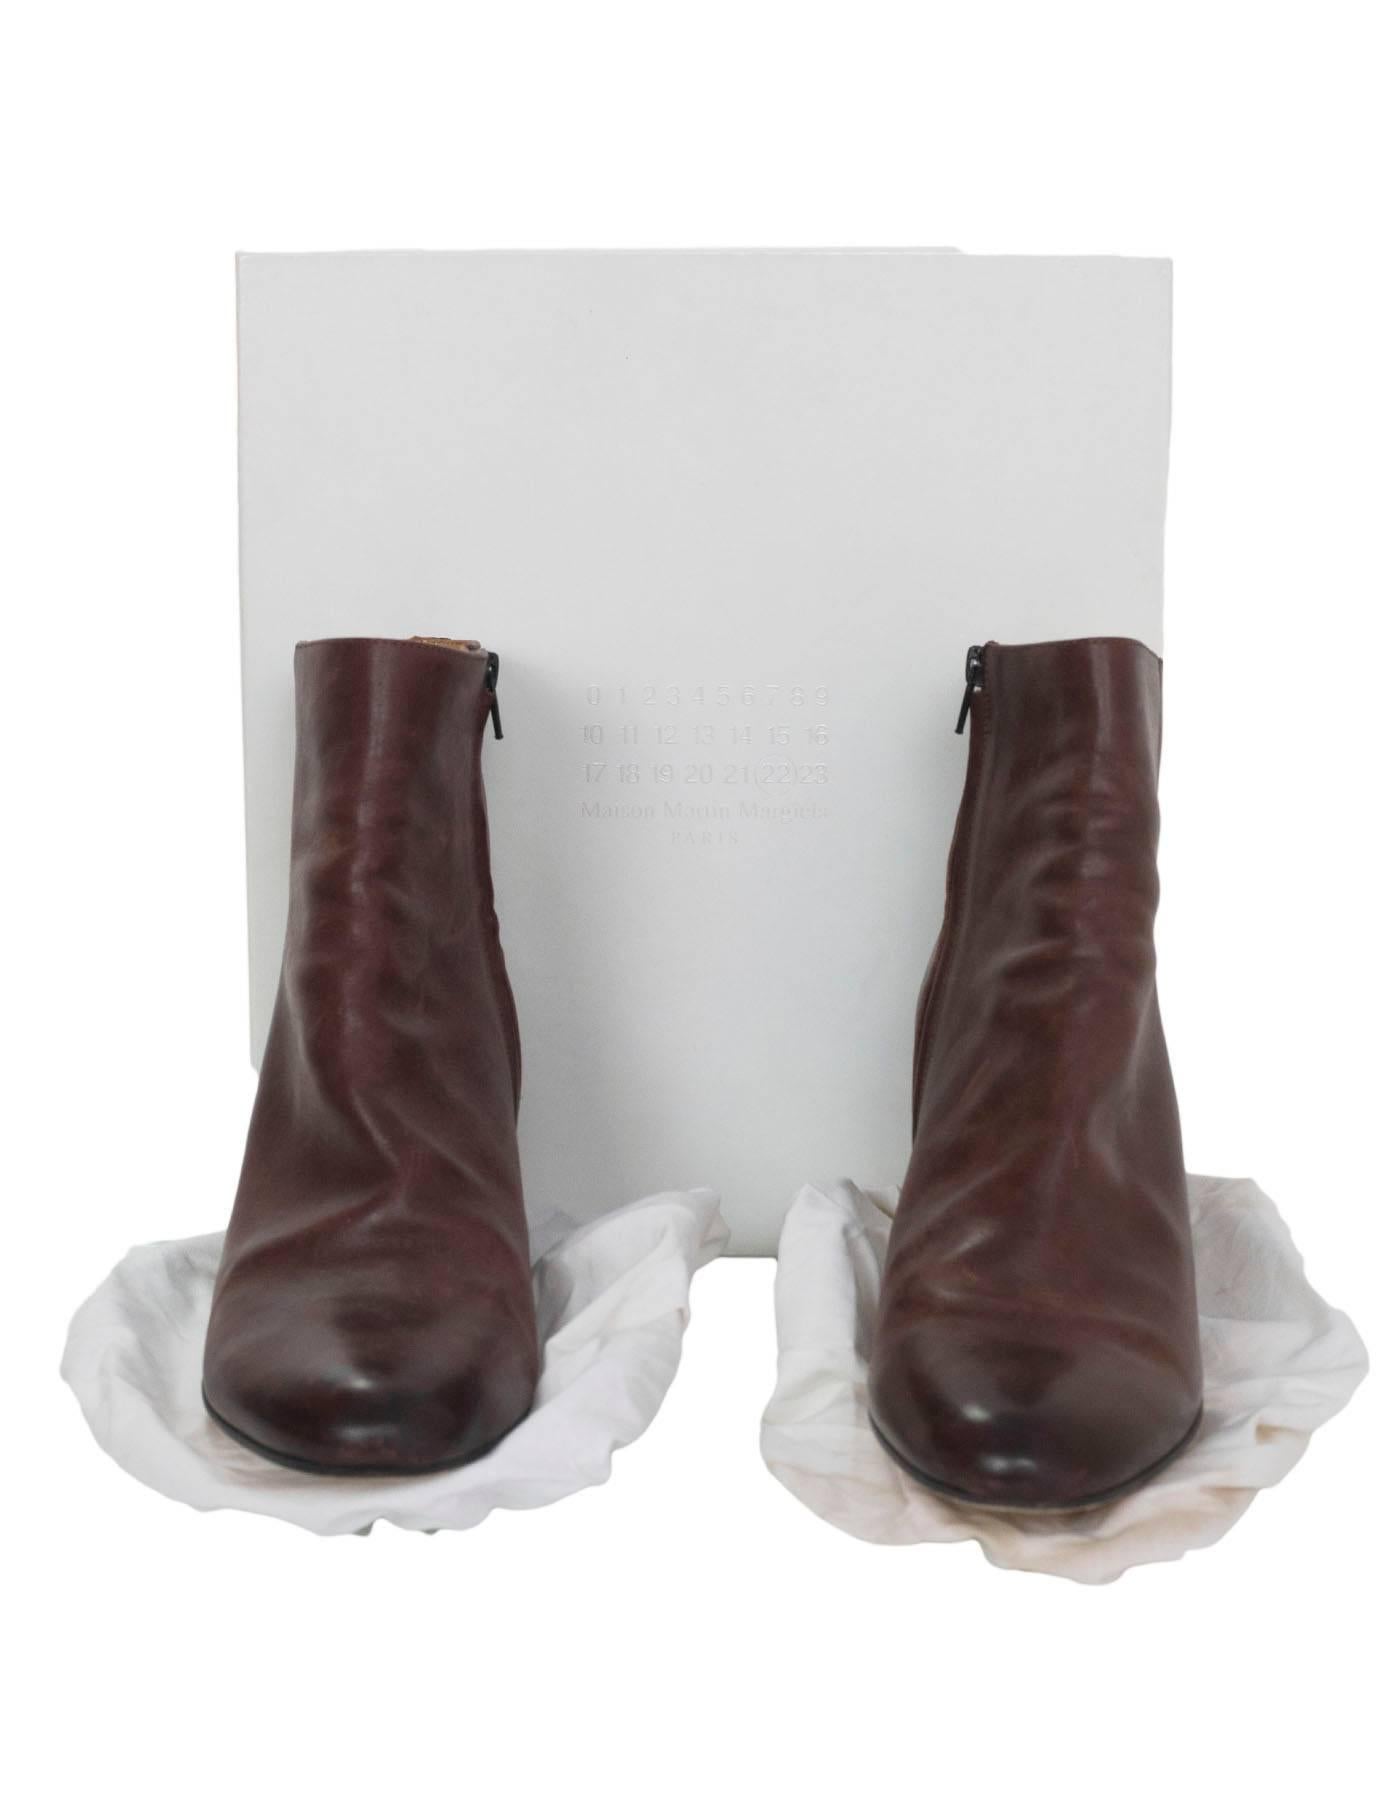 Maison Martin Margiela Brown Leather Ankle Boots Sz 39.5 with Box 6